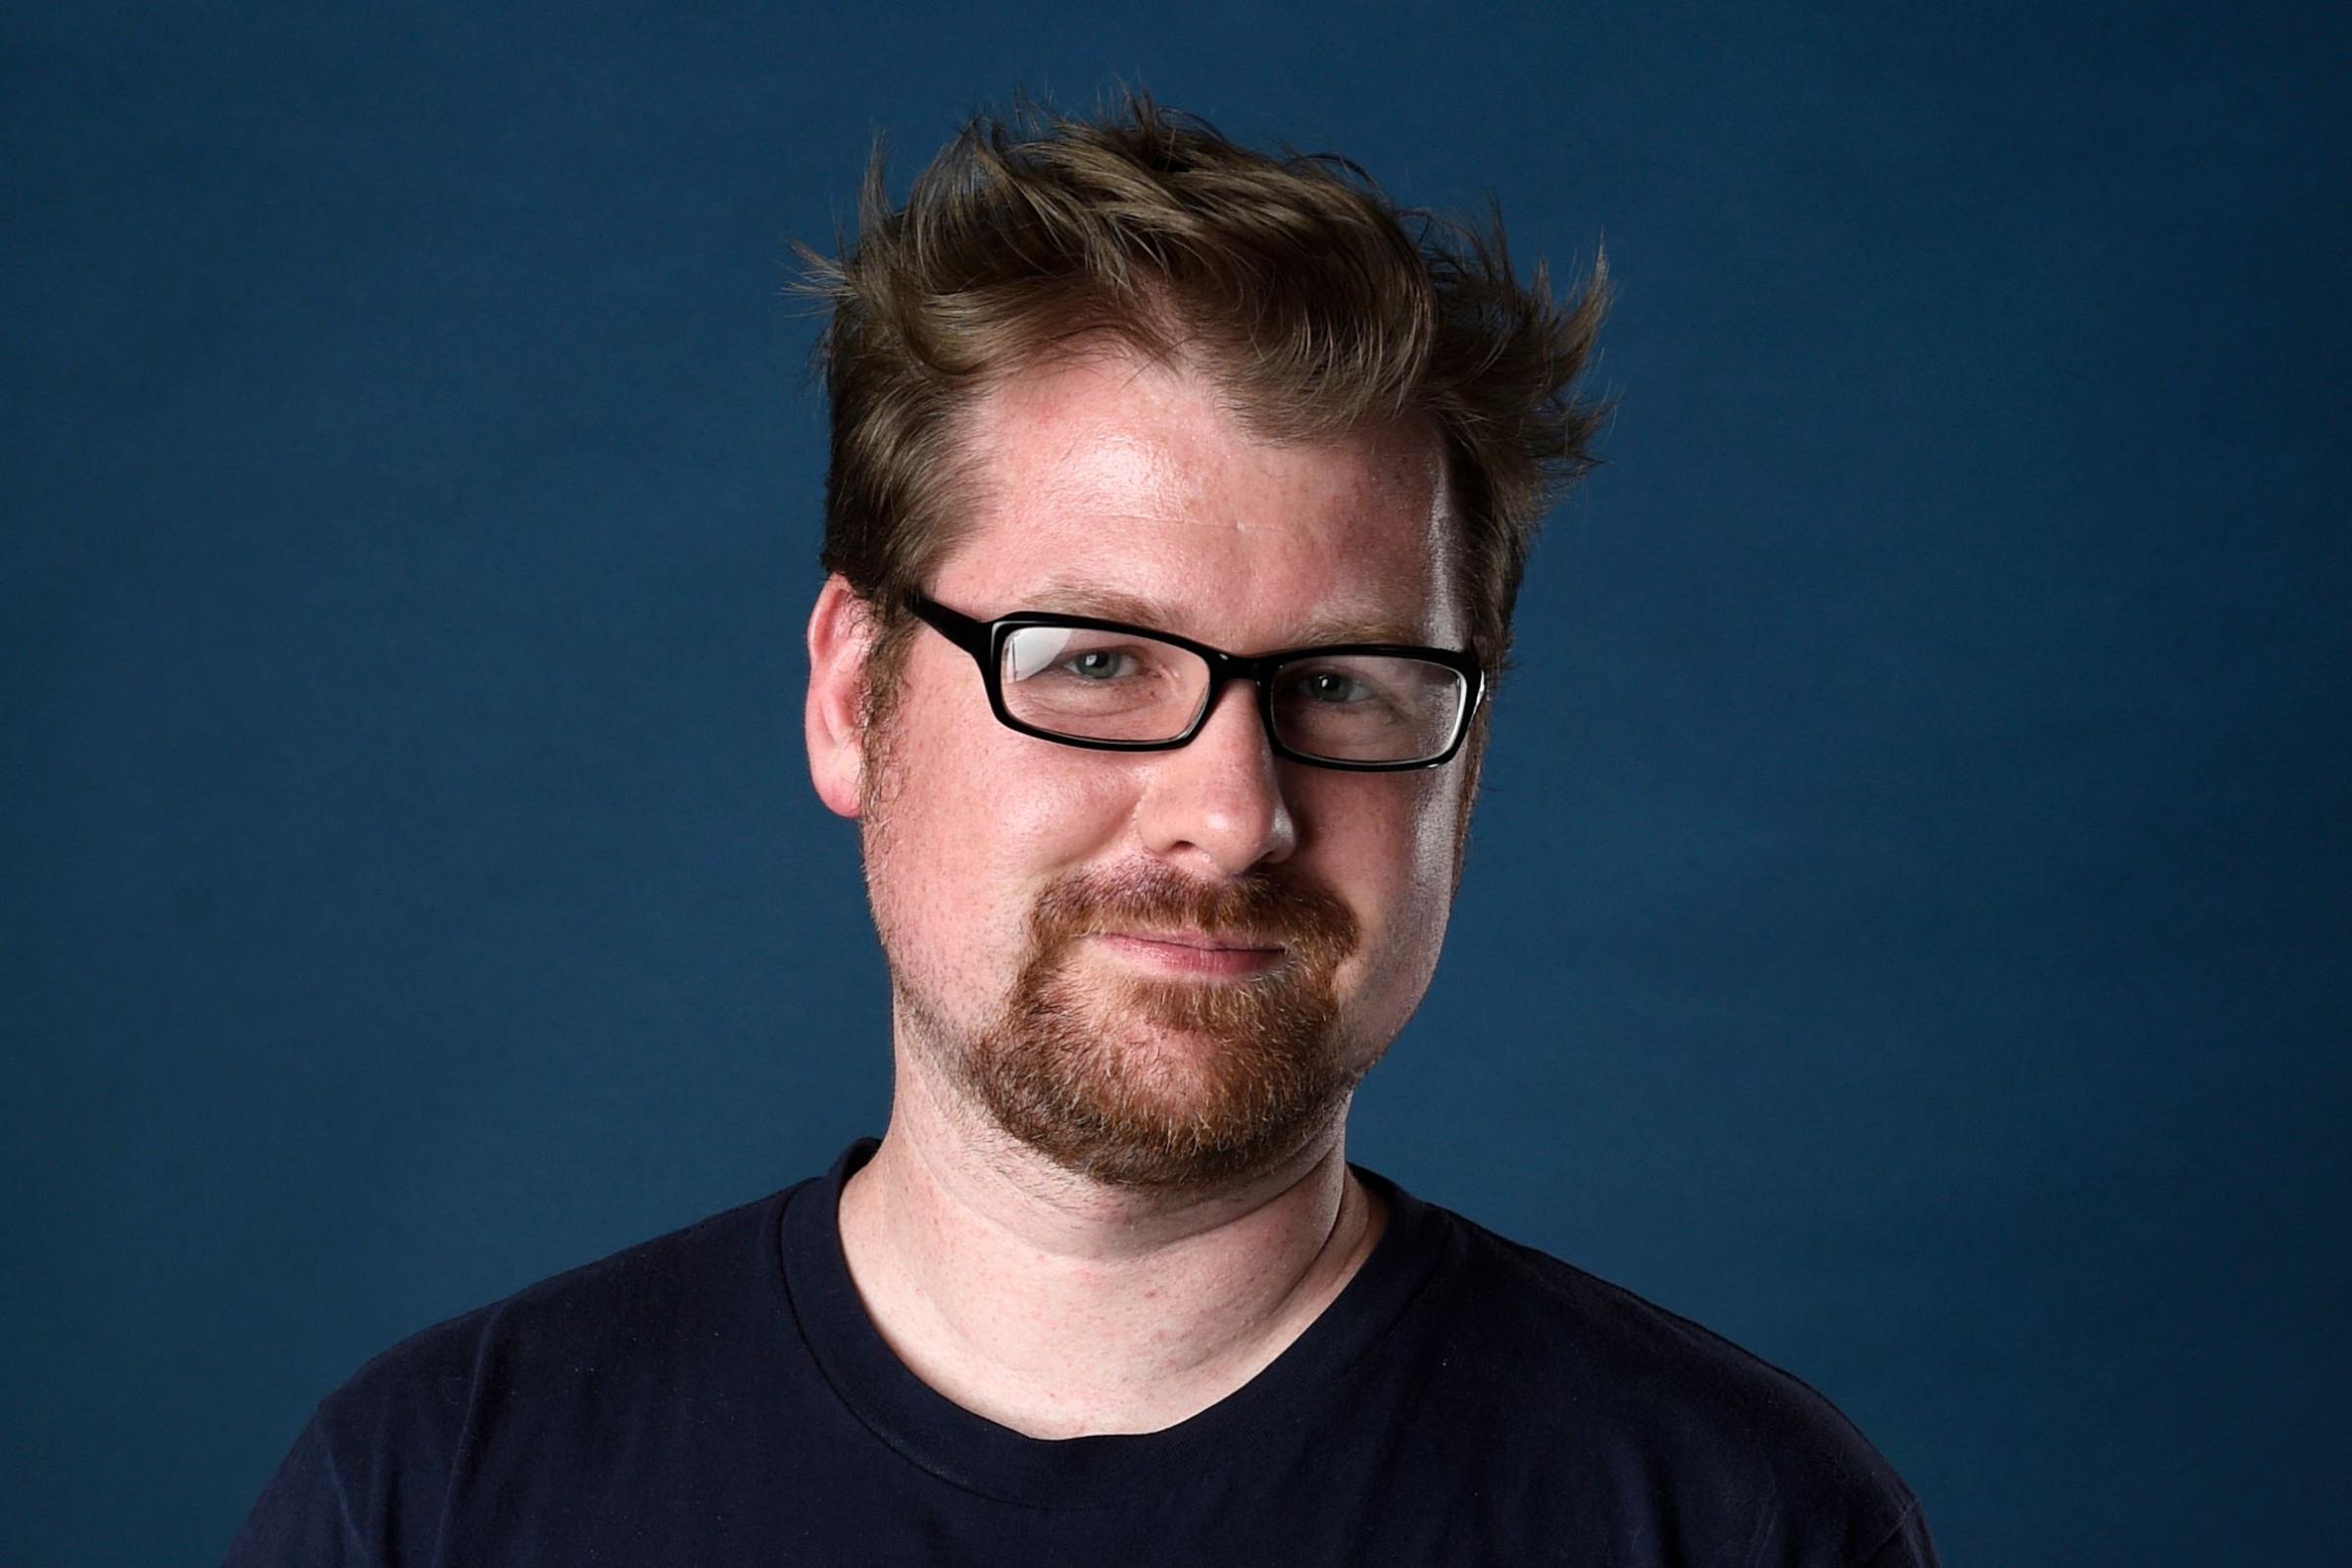 Hulu joins Adult Swim in cutting ties with Rick and Morty creator Justin Roiland